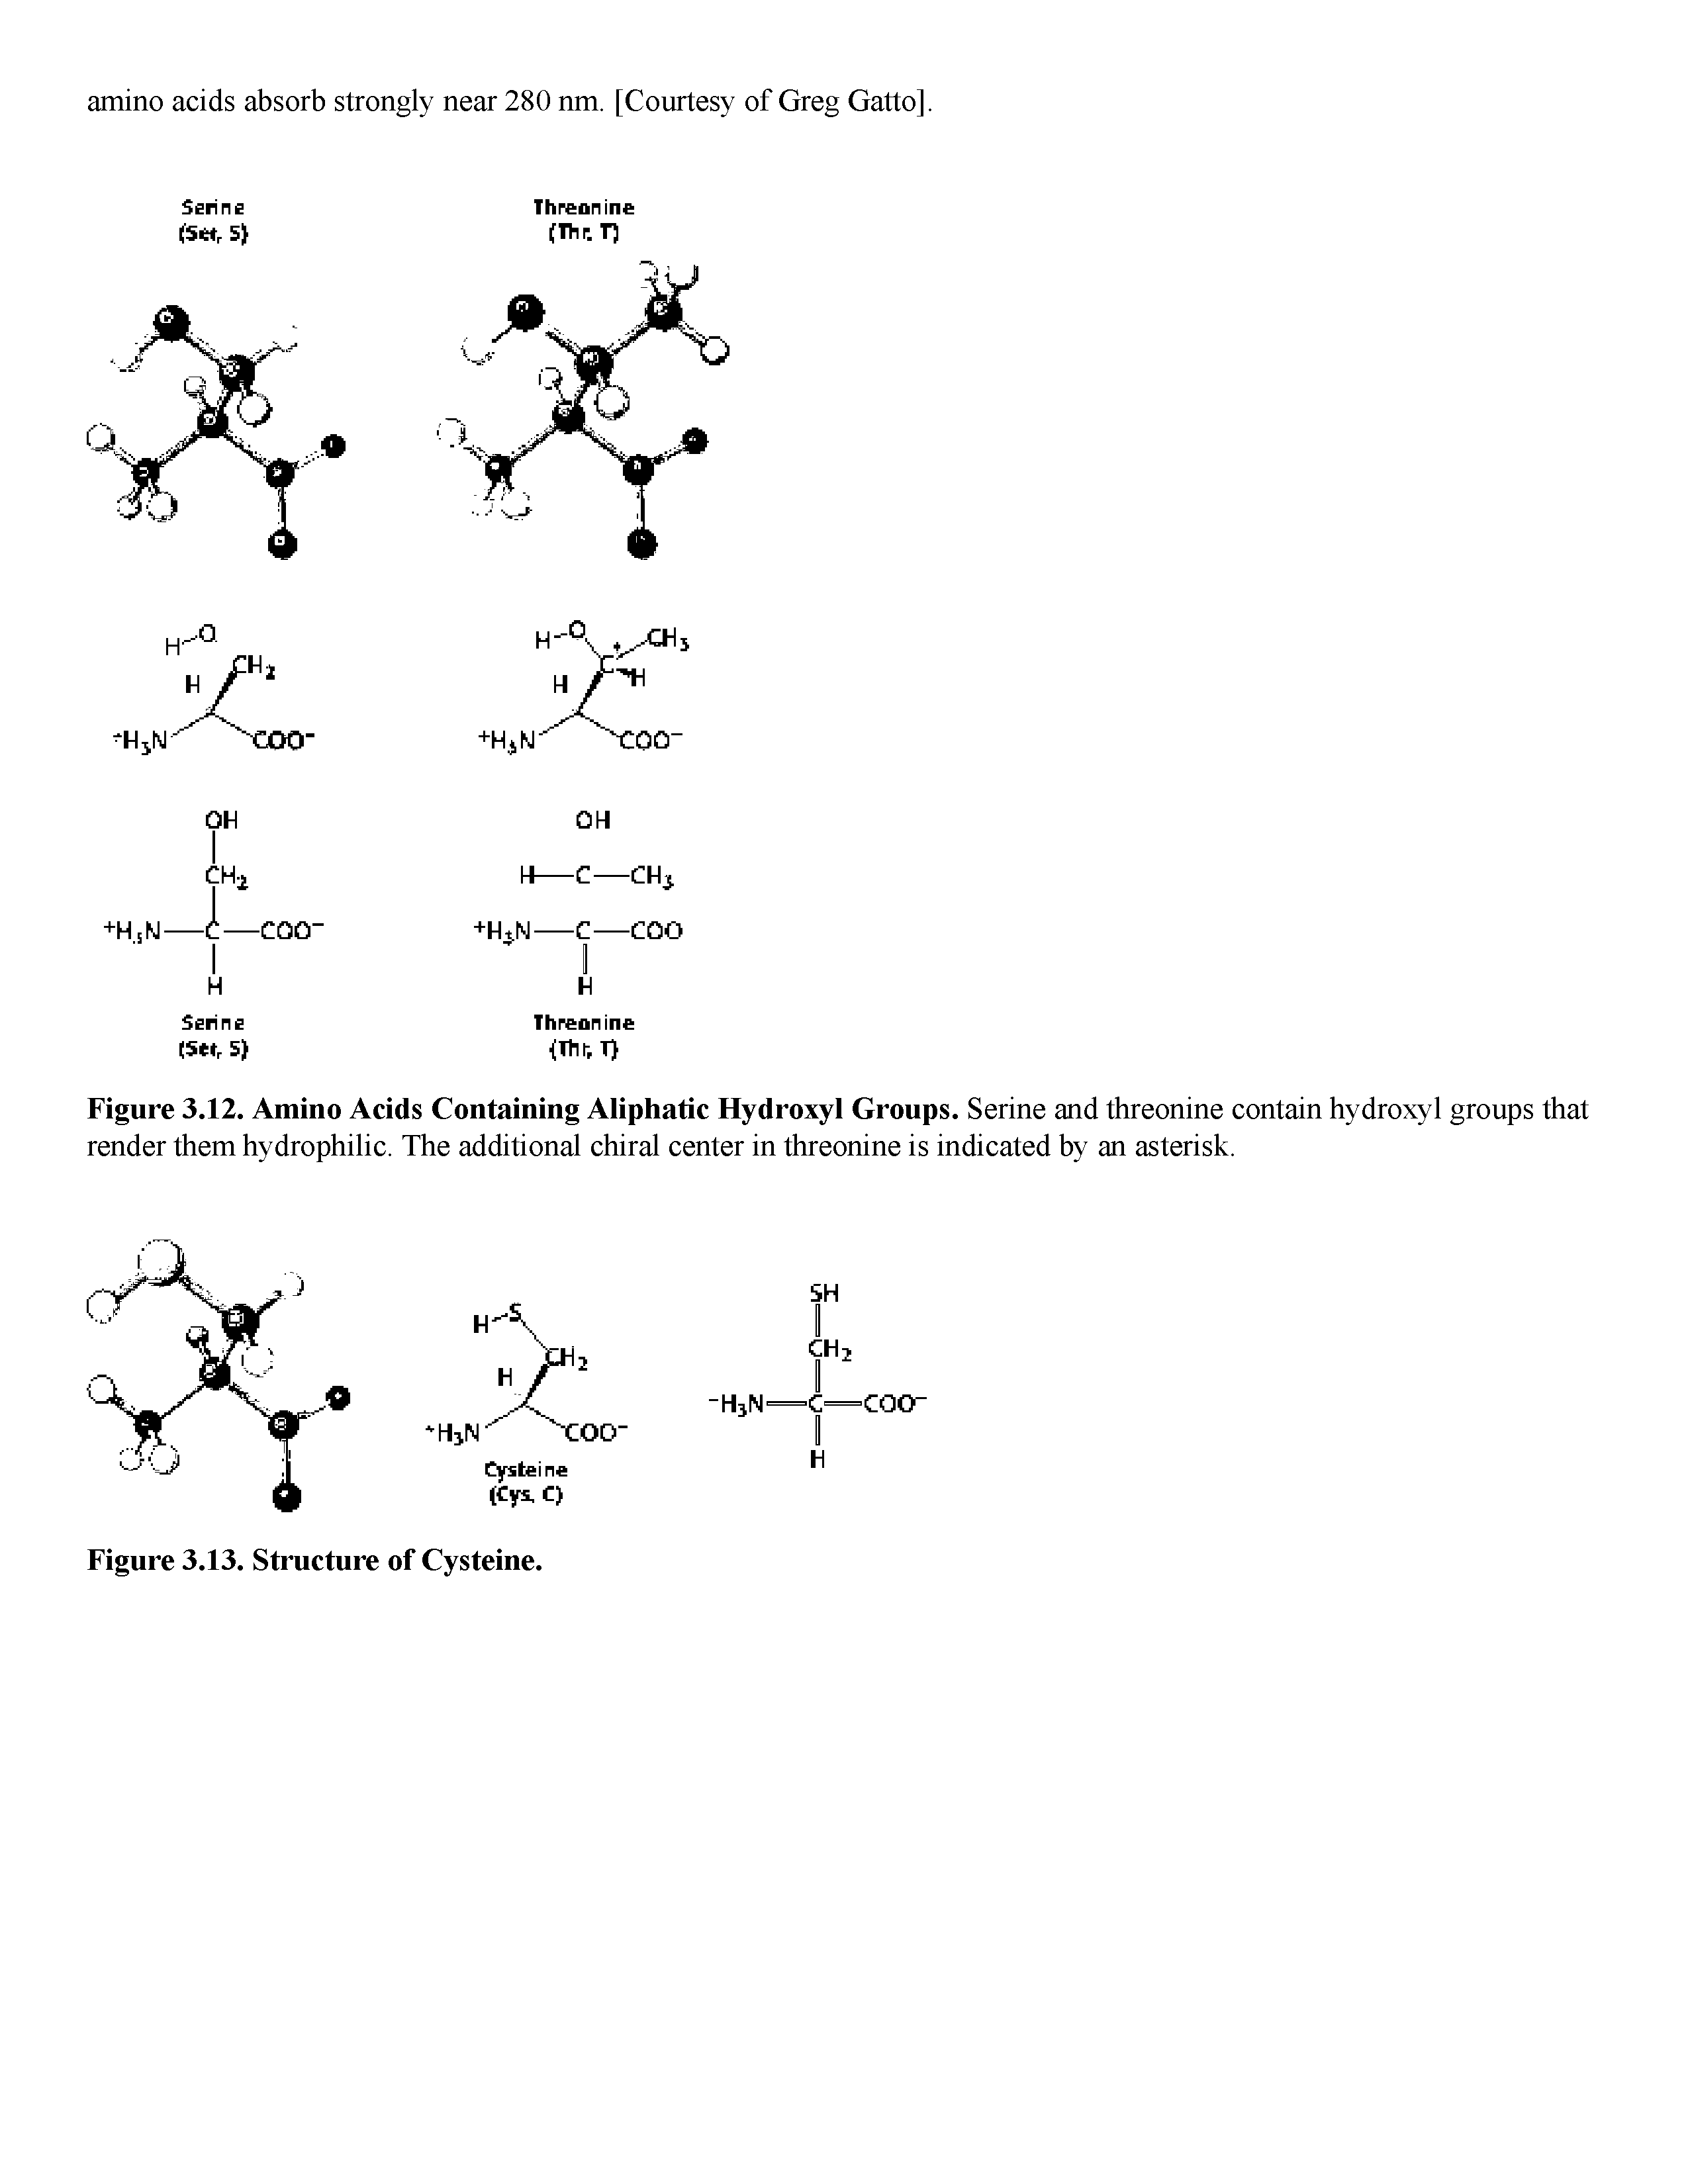 Figure 3.12. Amino Acids Containing Aliphatic Hydroxyl Groups. Serine and threonine contain hydroxyl groups that render them hydrophilic. The additional chiral center in threonine is indicated by an asterisk.